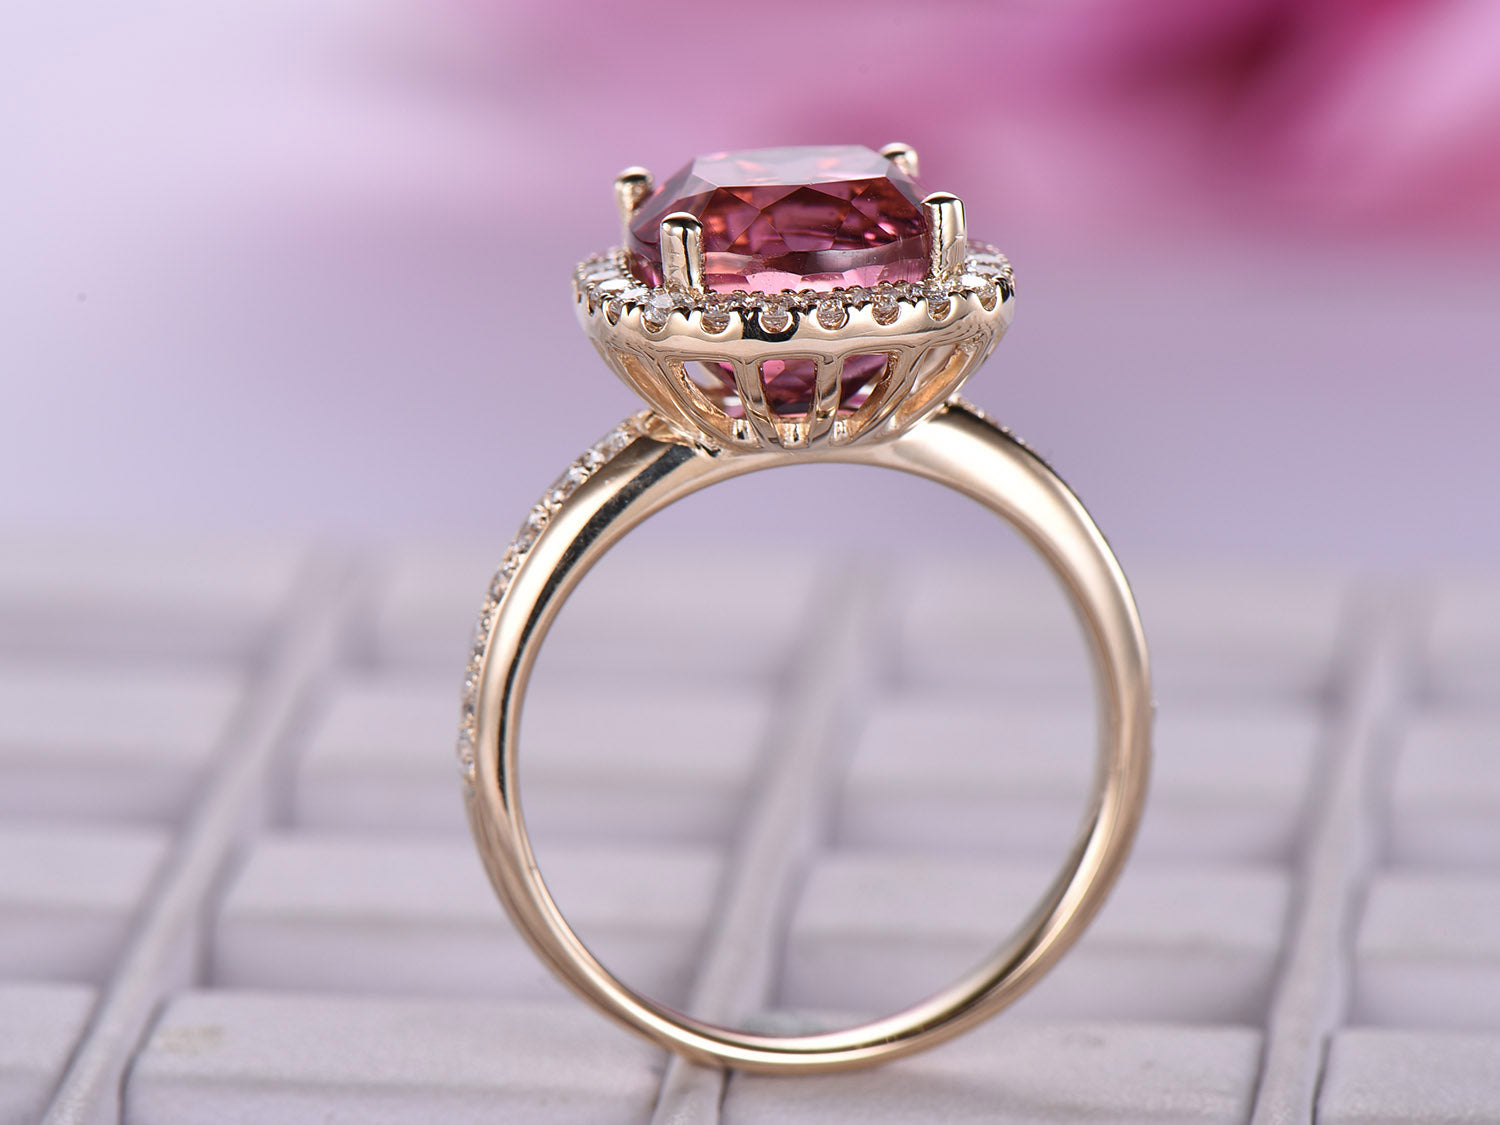 Reserved for Jo Pink Tourmaline  Ring 1.5mm Diamond Halo 14k yellow gold 5.22ct